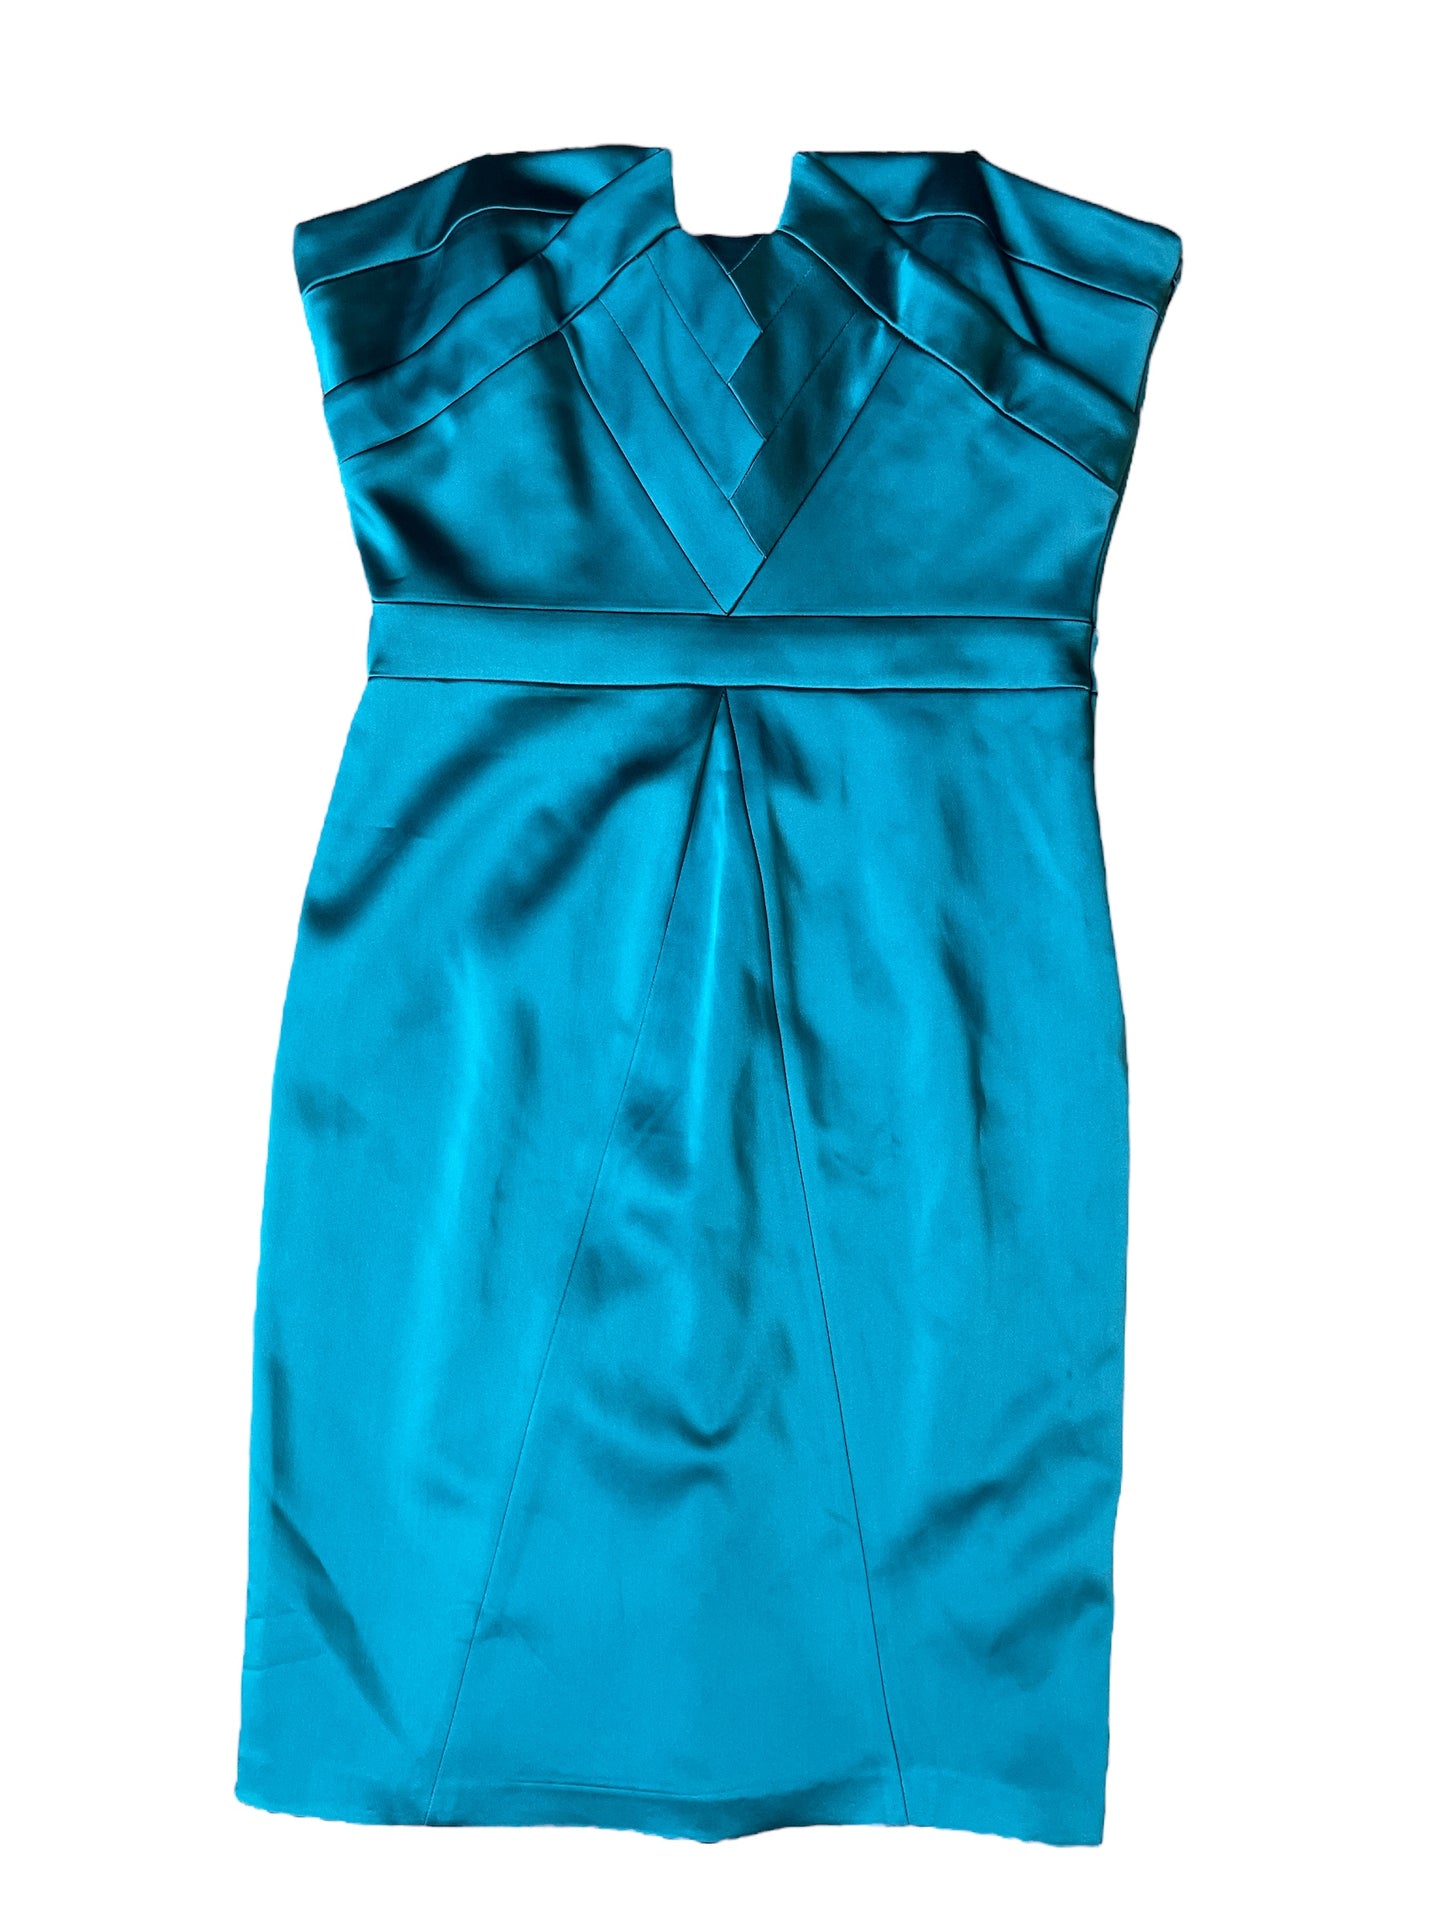 Laundry by Shelli Segal Turquoise Strapless Formal Dress with Detailing Size 4 NWT